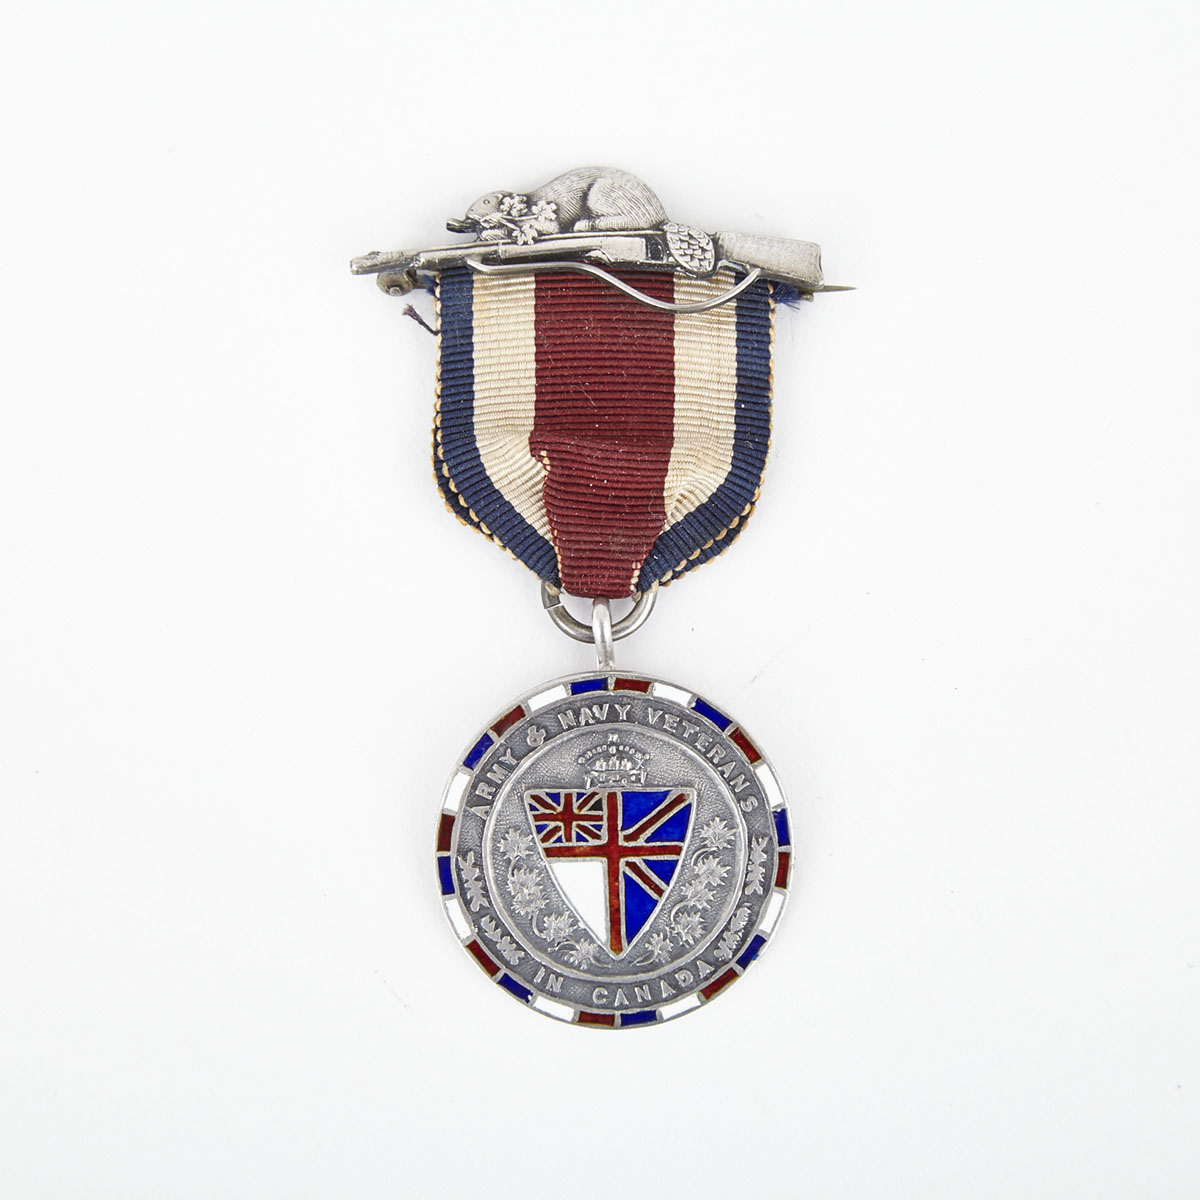 Army & Navy Veterans in Canada Medal to Lieutenant Governor Sir Daniel Hunter McMillan, late 19th century